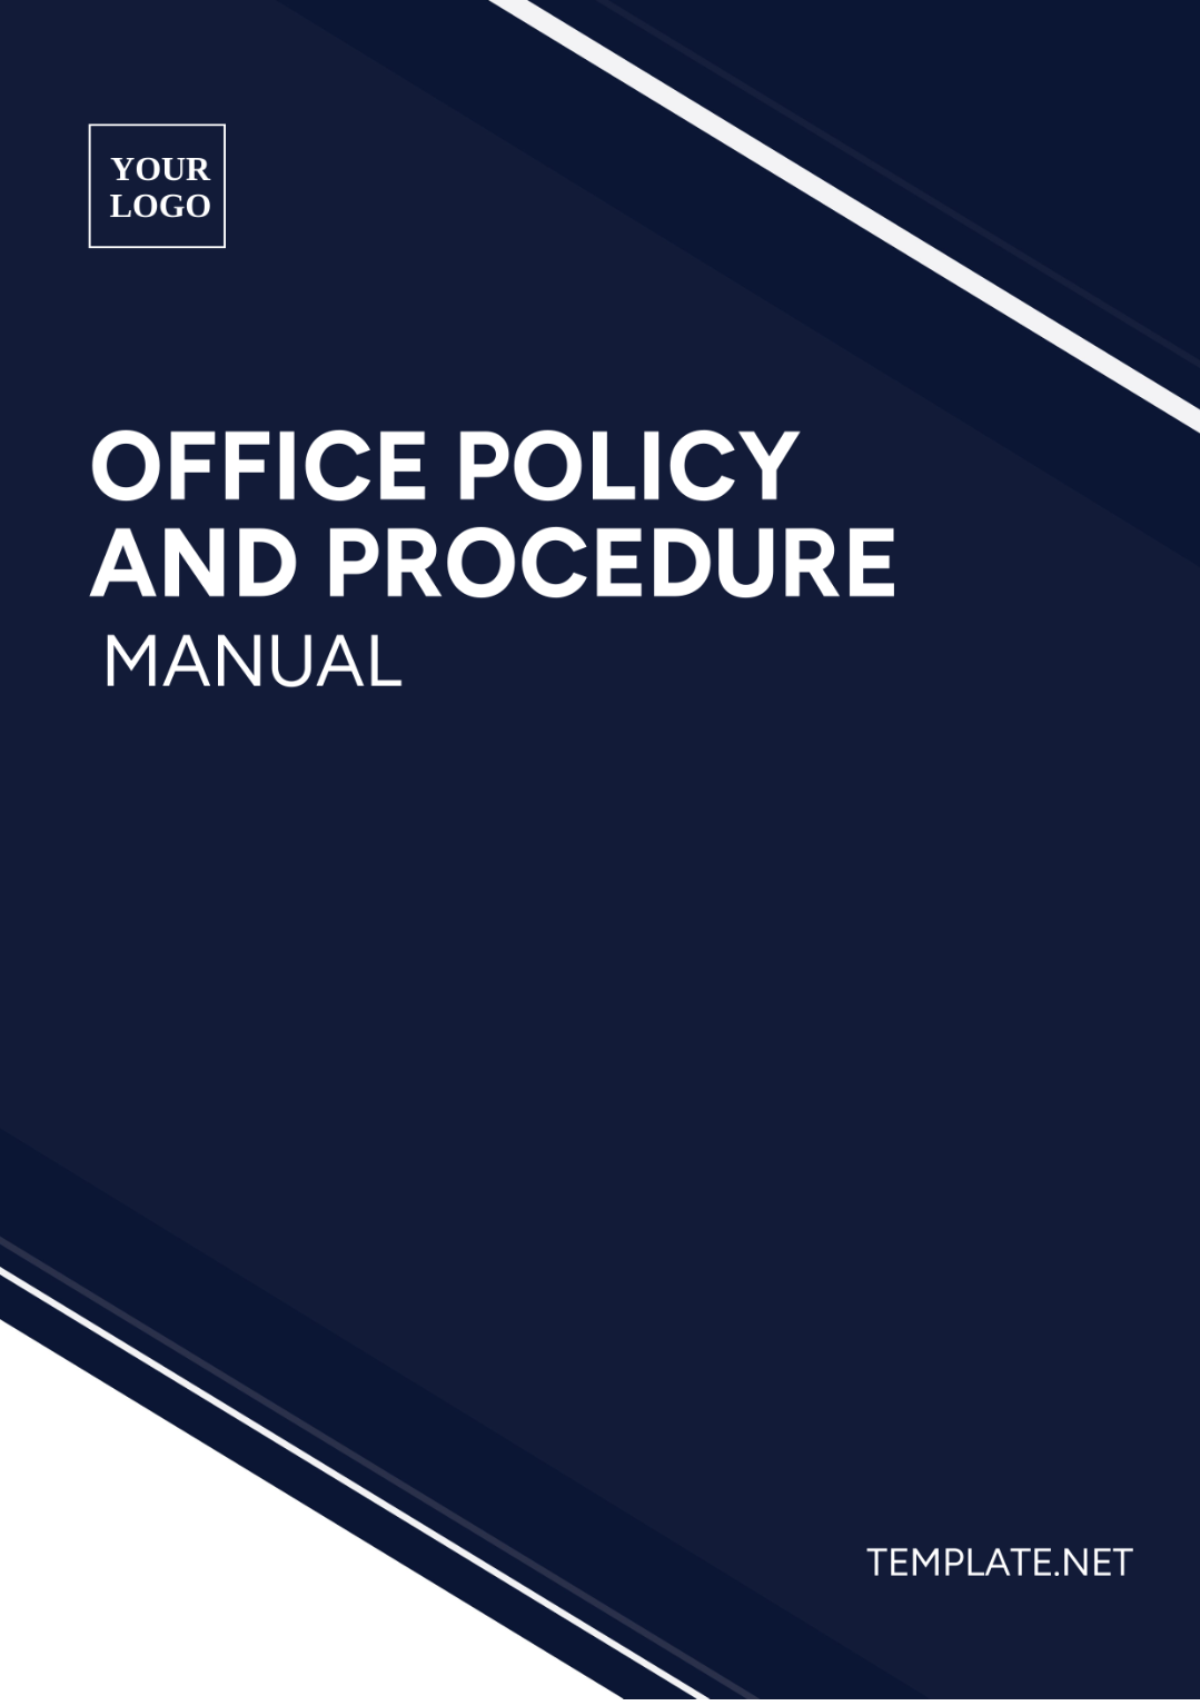 Office Policy and Procedure Manual Template